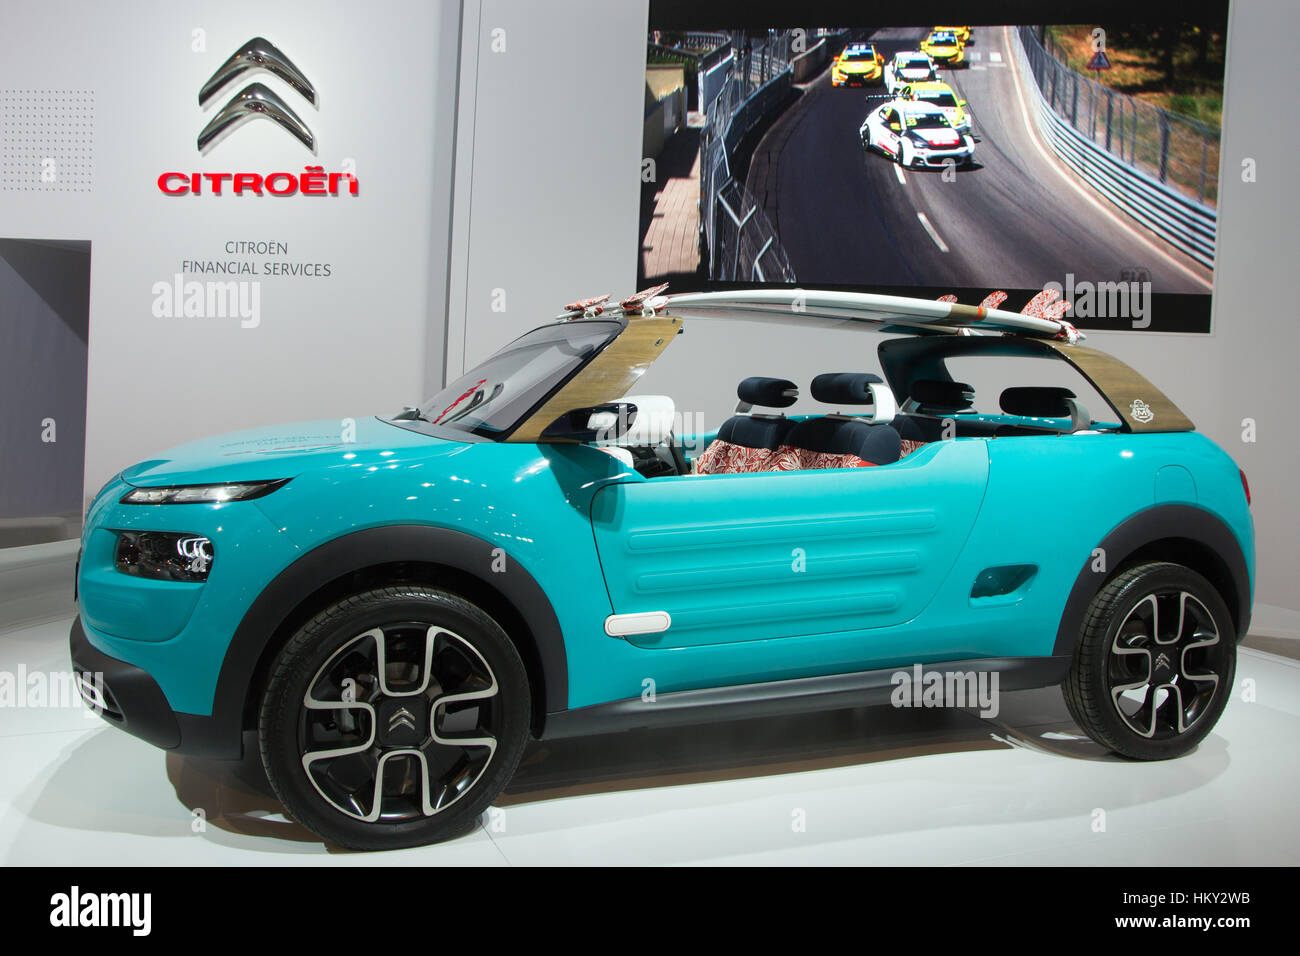 BRUSSELS - JAN 12, 2016: Citroen Cactus M on display at the Brussels Motor Show. Stock Photo